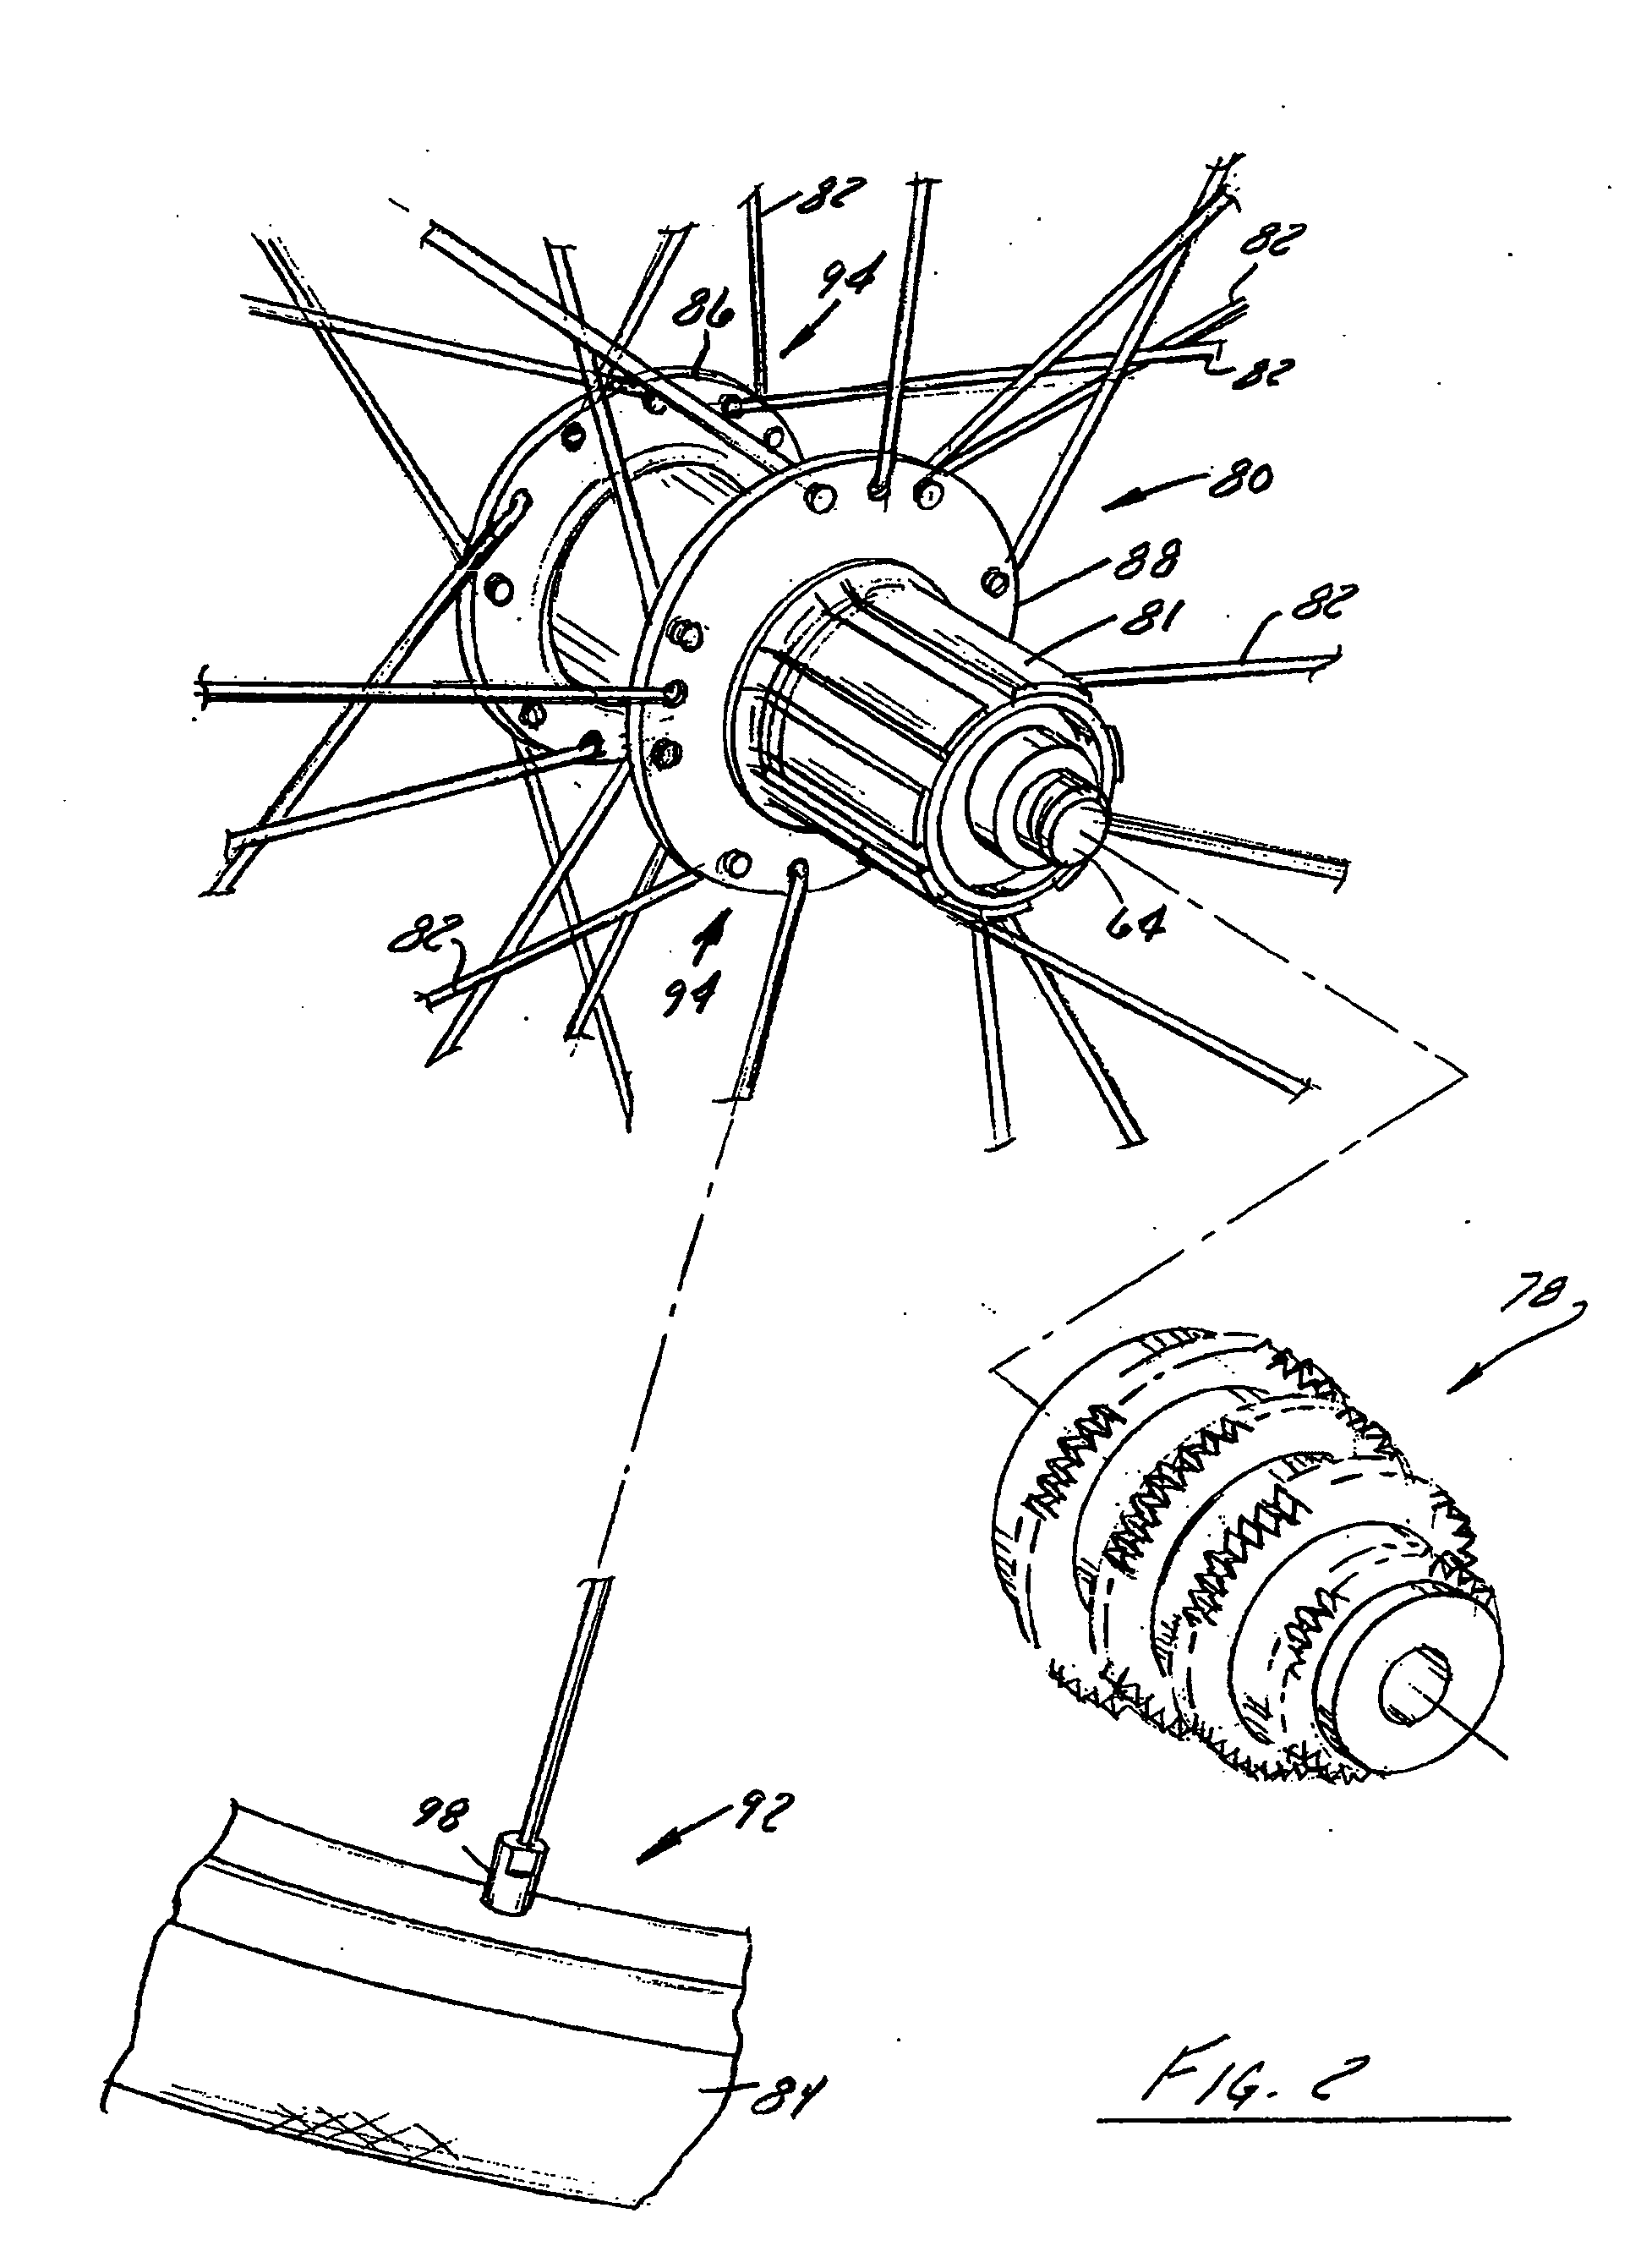 Bicycle wheel assembly having dissimilar lateral spoke lacings